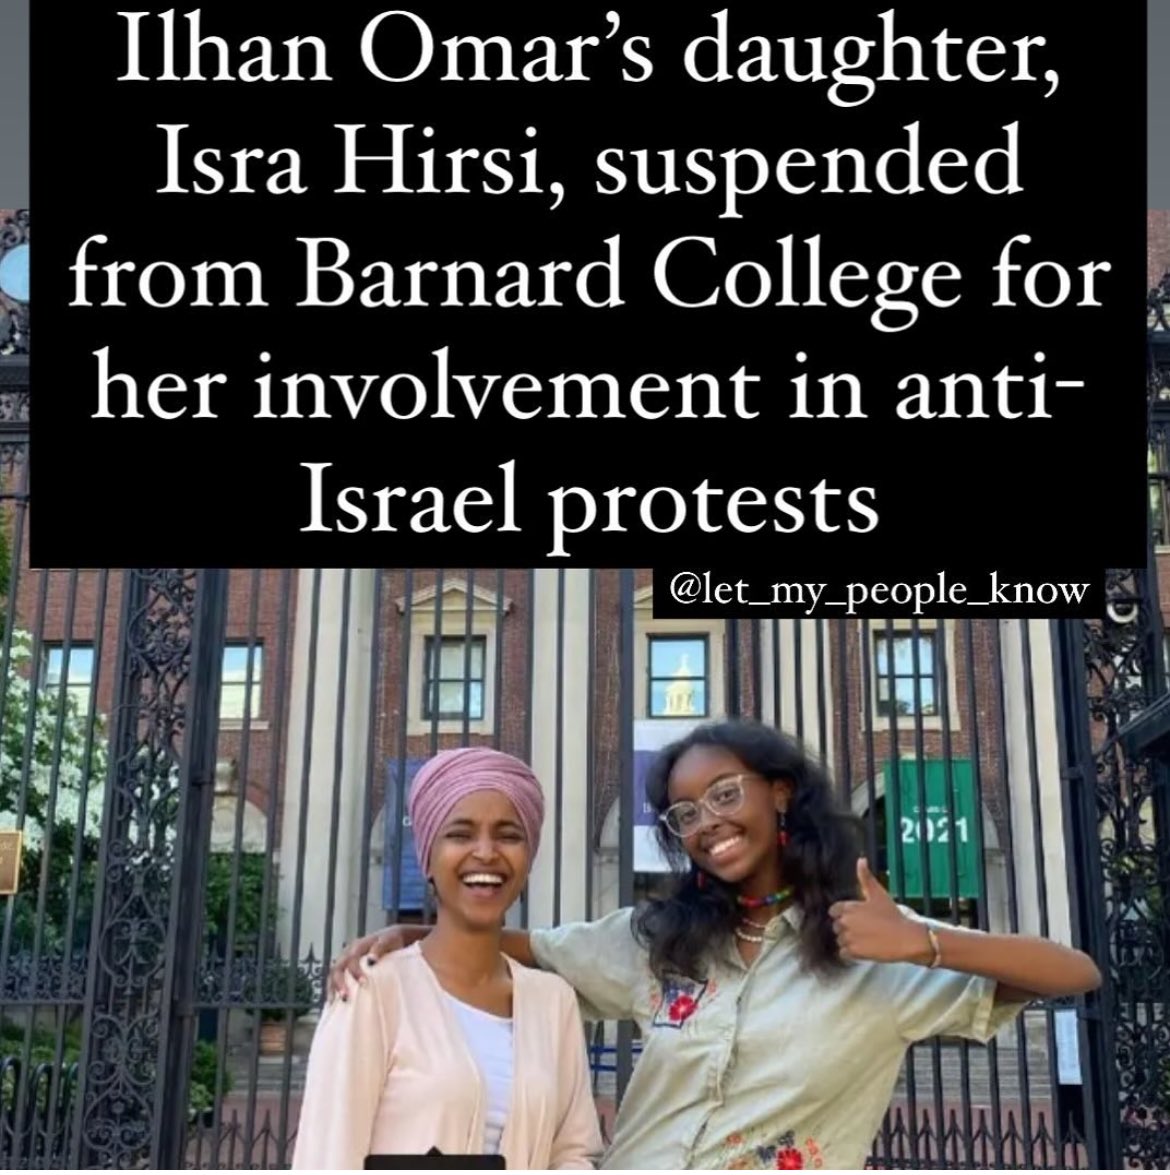 Shame on us for allowing anti-Semitism to continue on campuses.